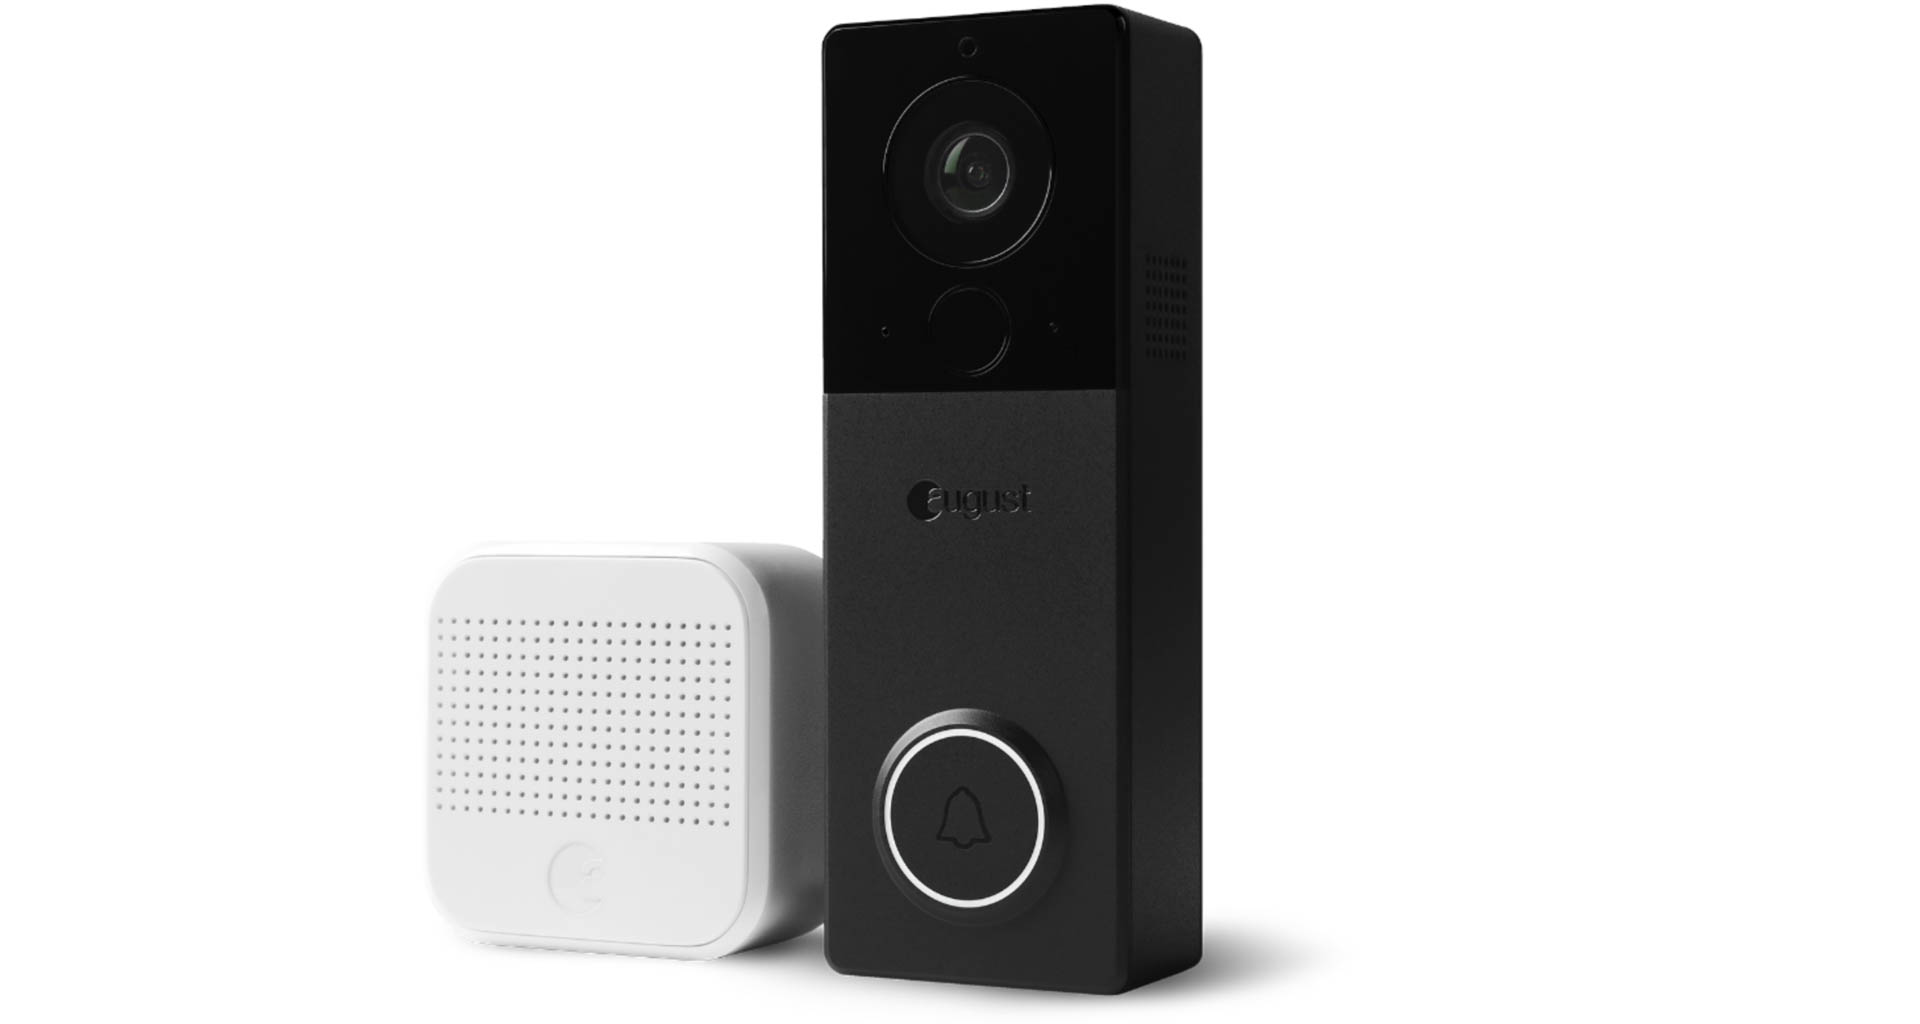 Smart lock maker August Home has added the August View to its line of video doorbells. Image: August Home.